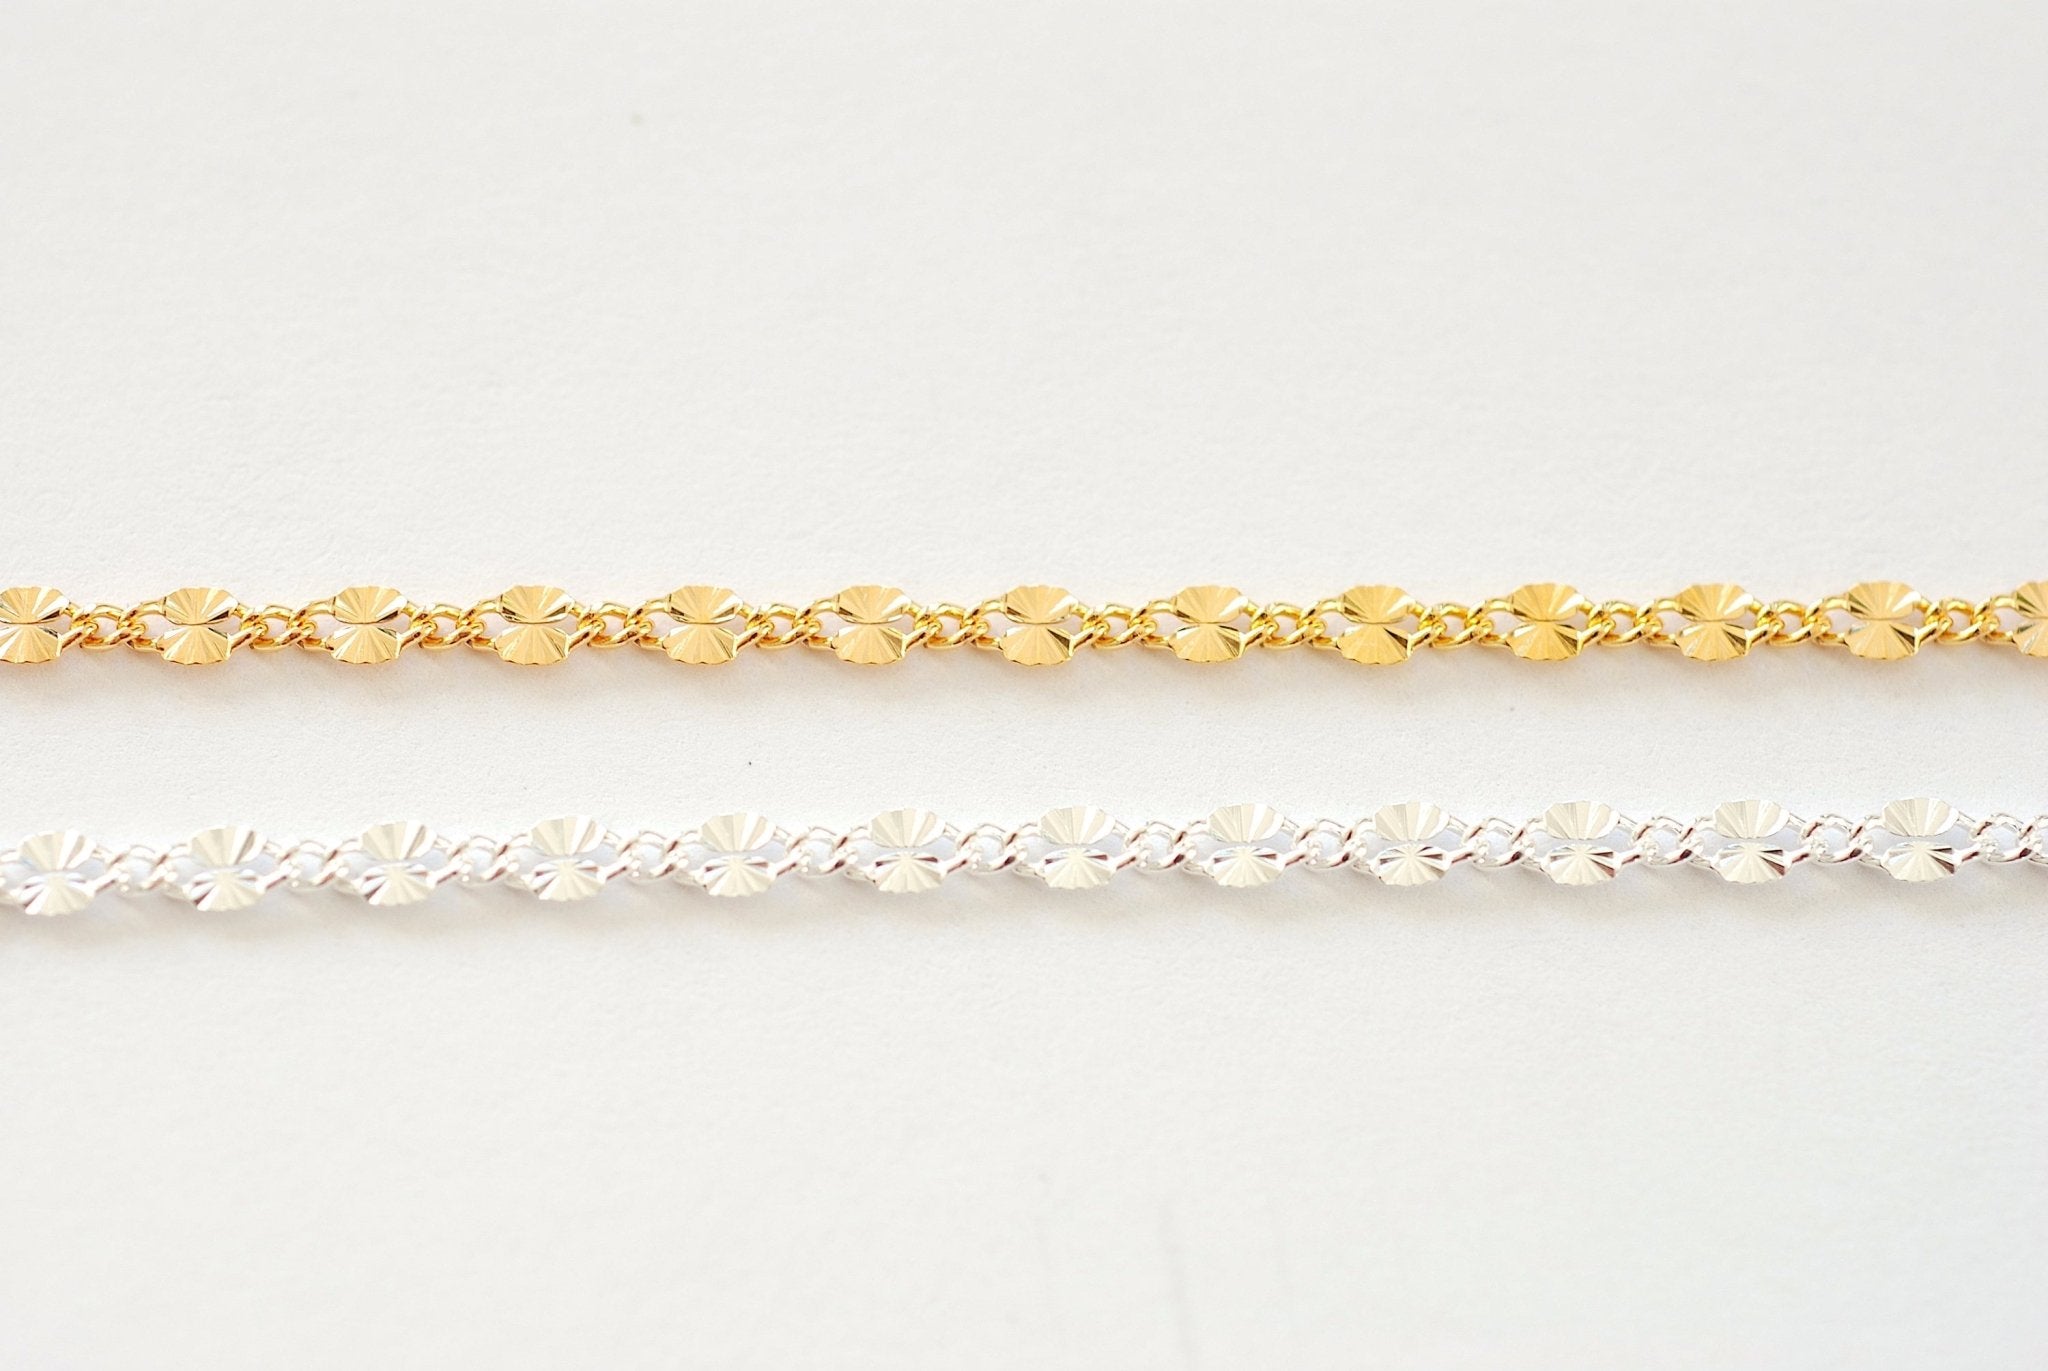 Wholesale 2.5mm Starburst chain l Permanent Jewelry Sparkle Diamond Cut Chain in Gold Filled or Sterling Silver - HarperCrown